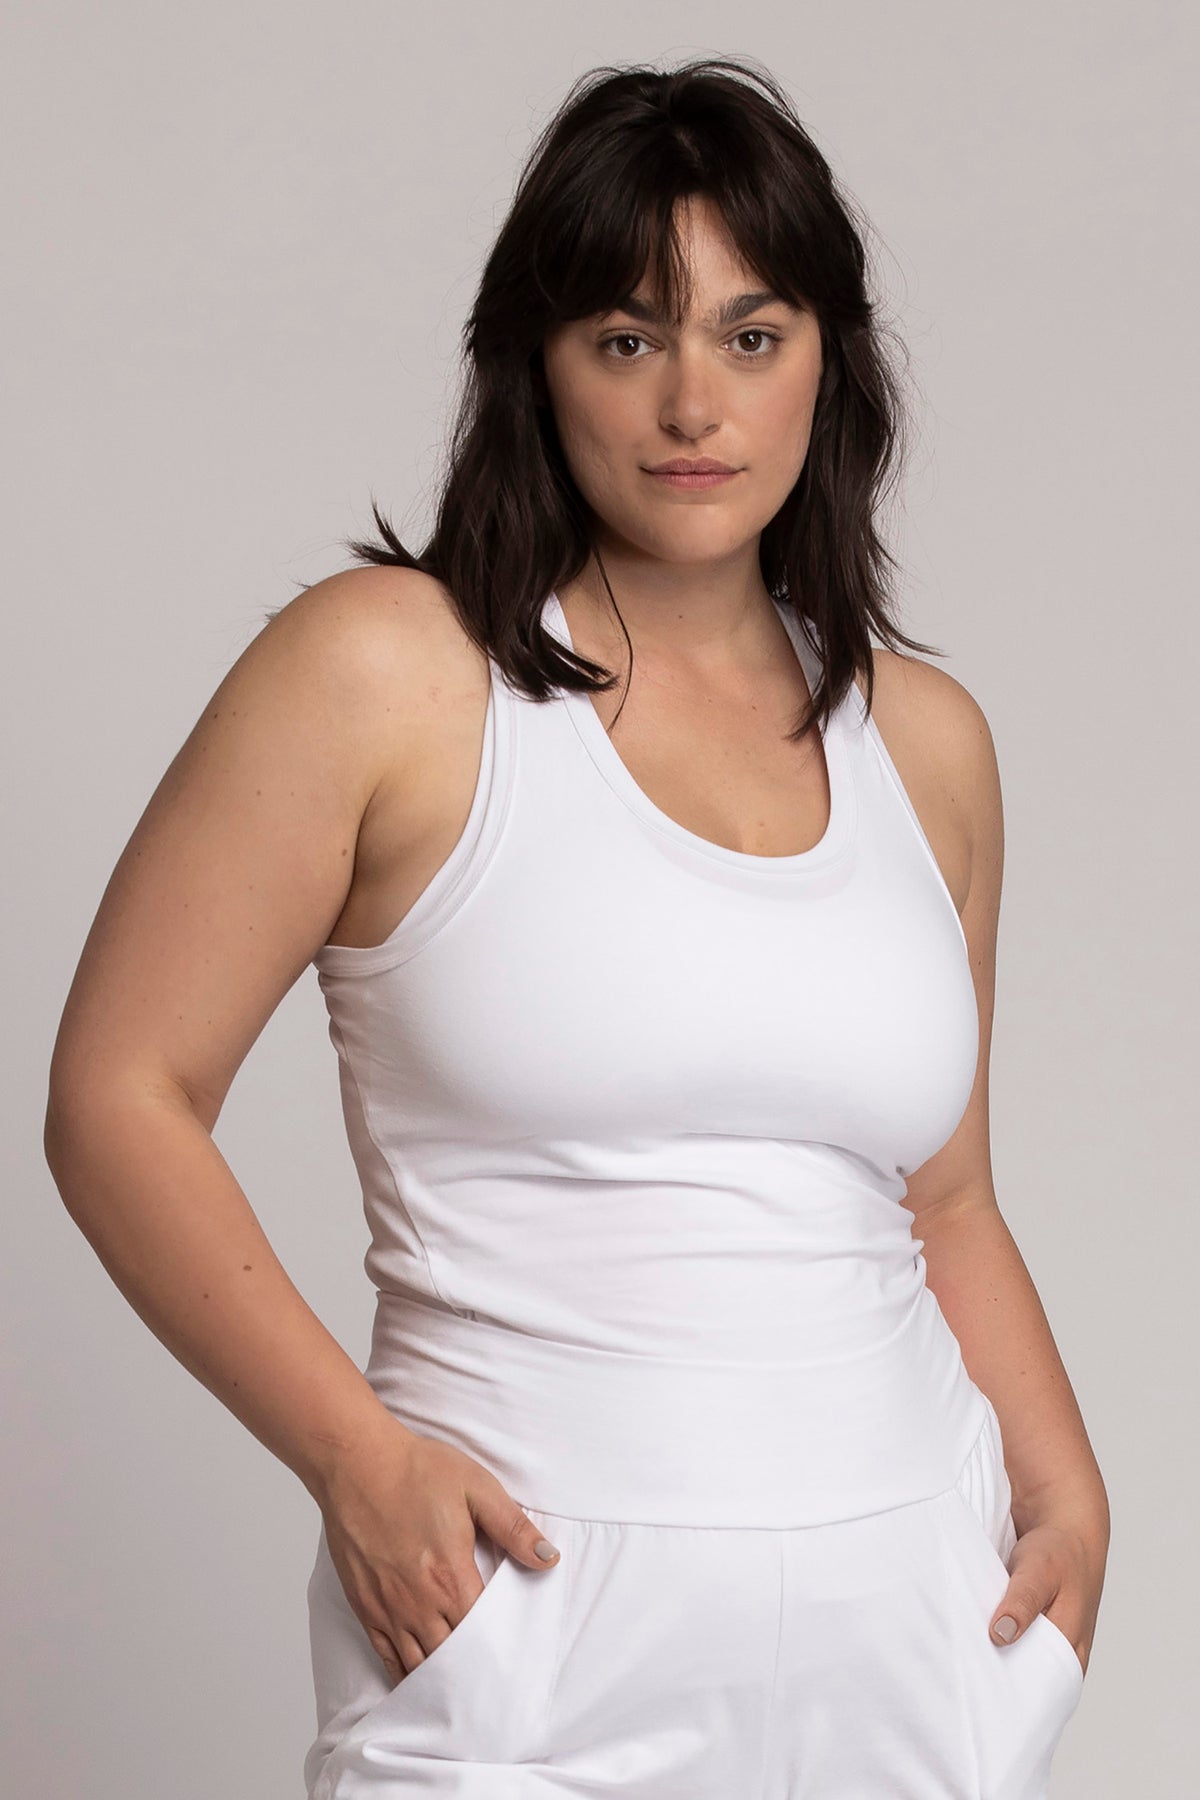 I’mPerfect Organic Cotton Racer Tank Top 35%off